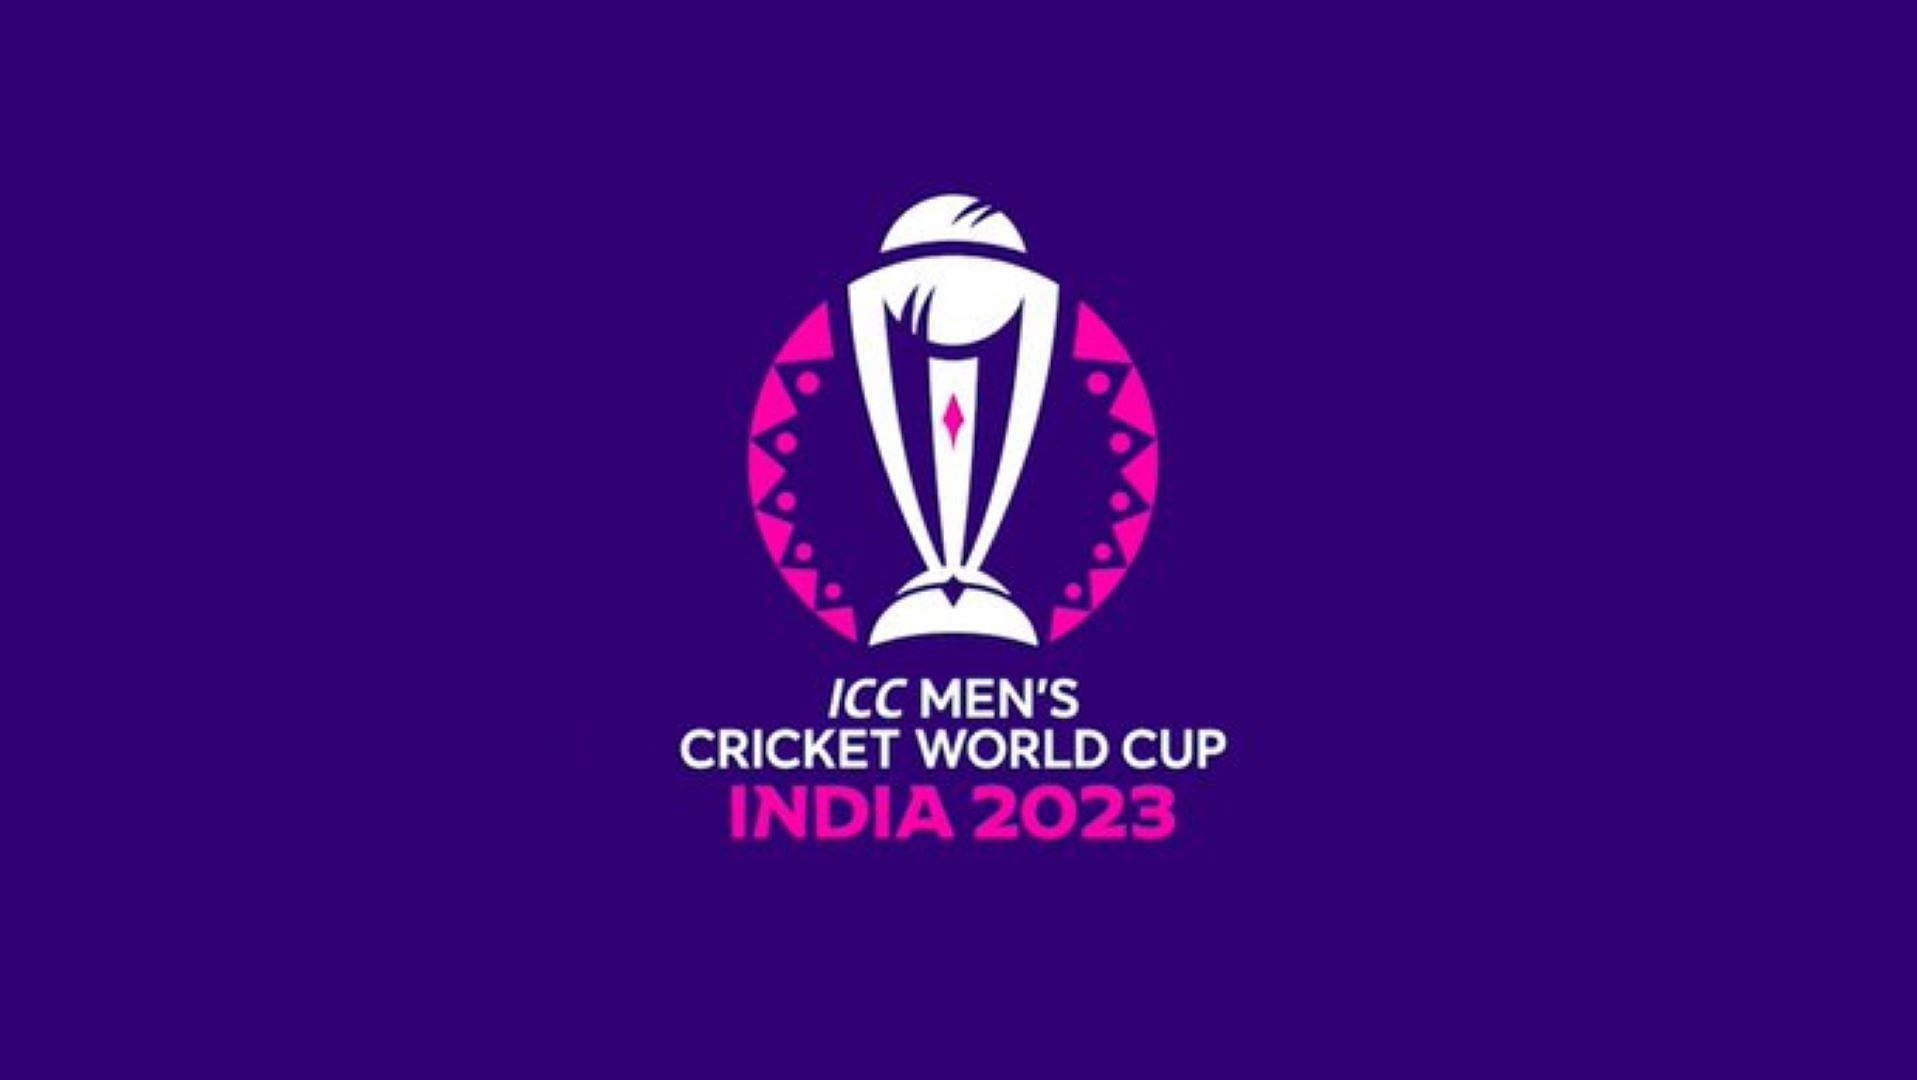 ICC releases the brand entity for the 2023 World Cup